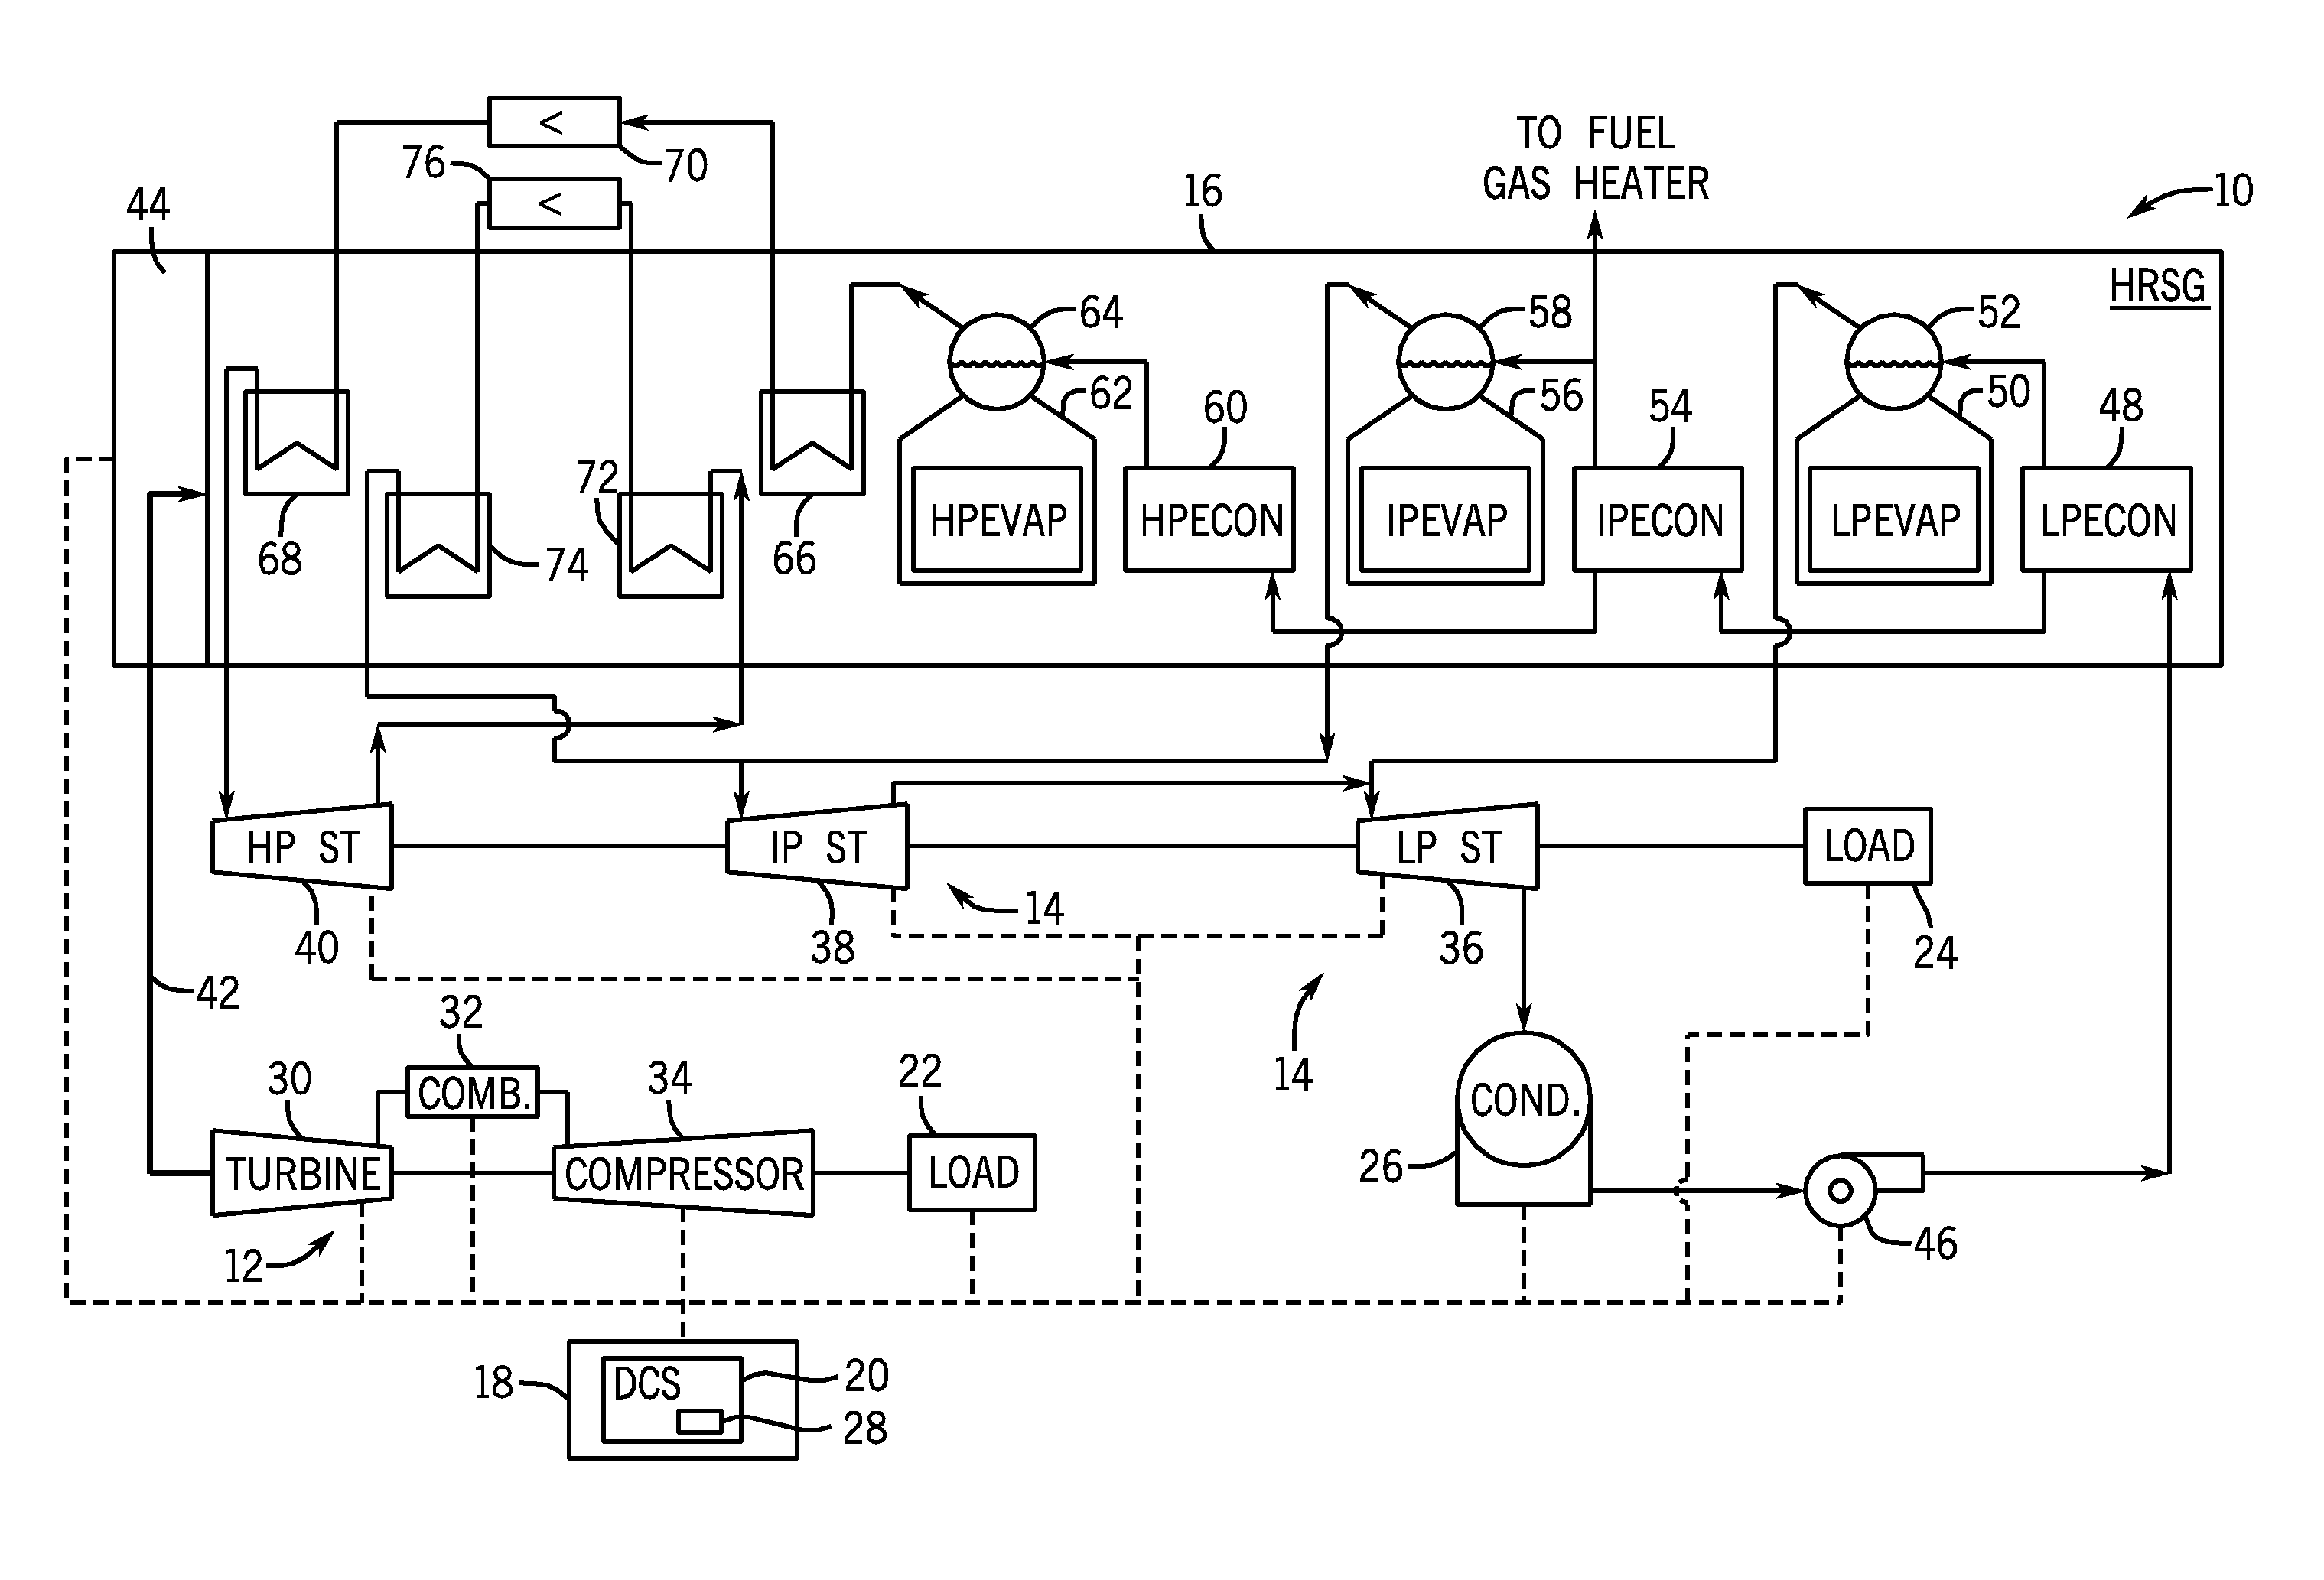 Systems and methods for heat recovery steam generation optimization